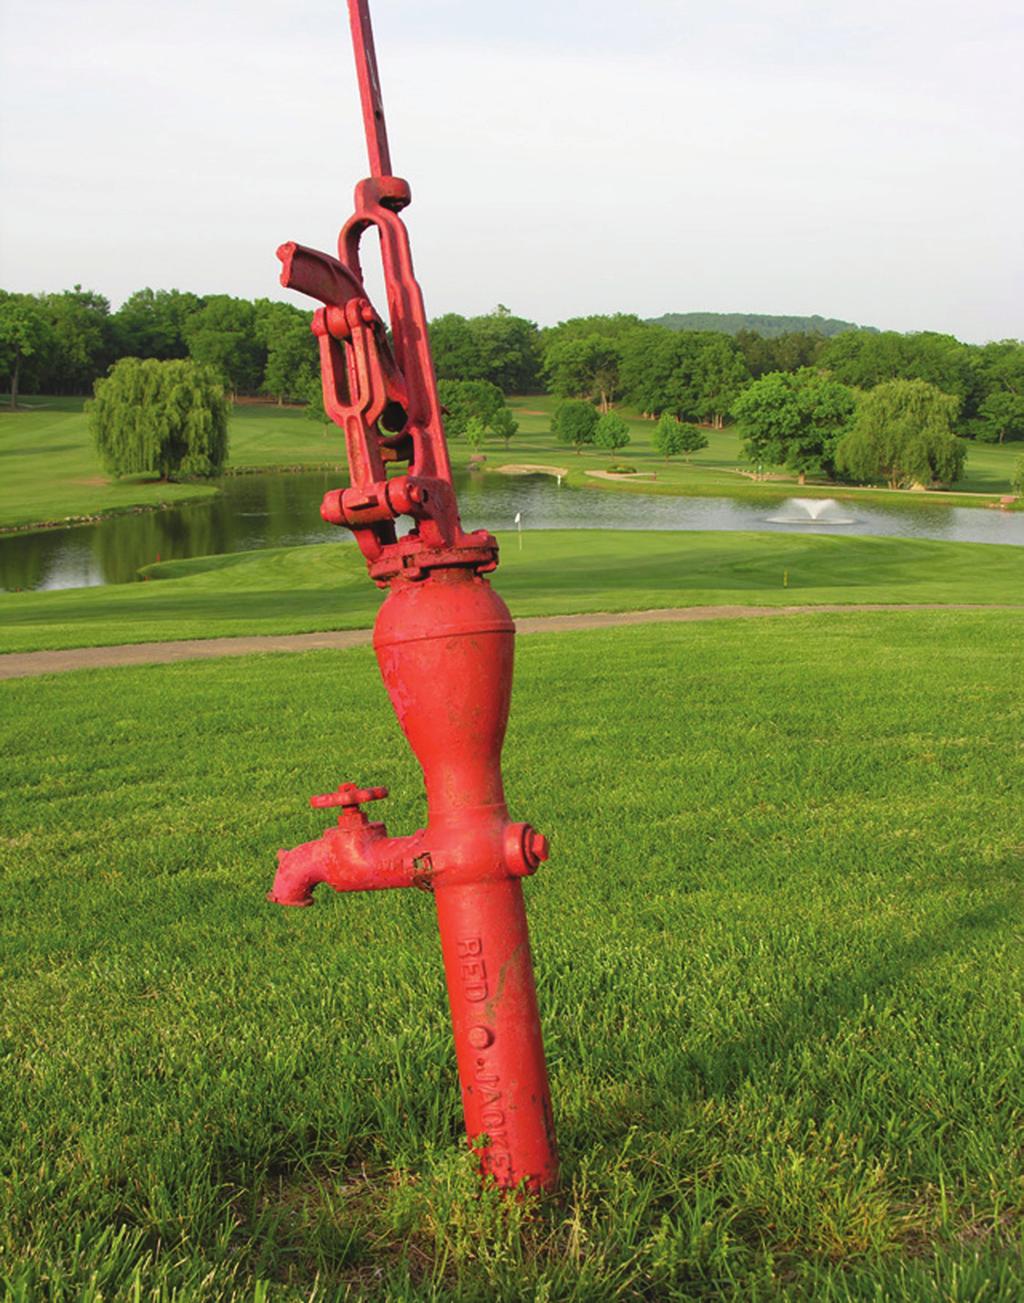 table of contents IntroductIon: rain BIrd PumP EffIcIEncy Program Overview...1 Resources...1 SEctIon one: PumPS and PumP testing Pumps and How They Work...3 Rain Bird Pump Test.